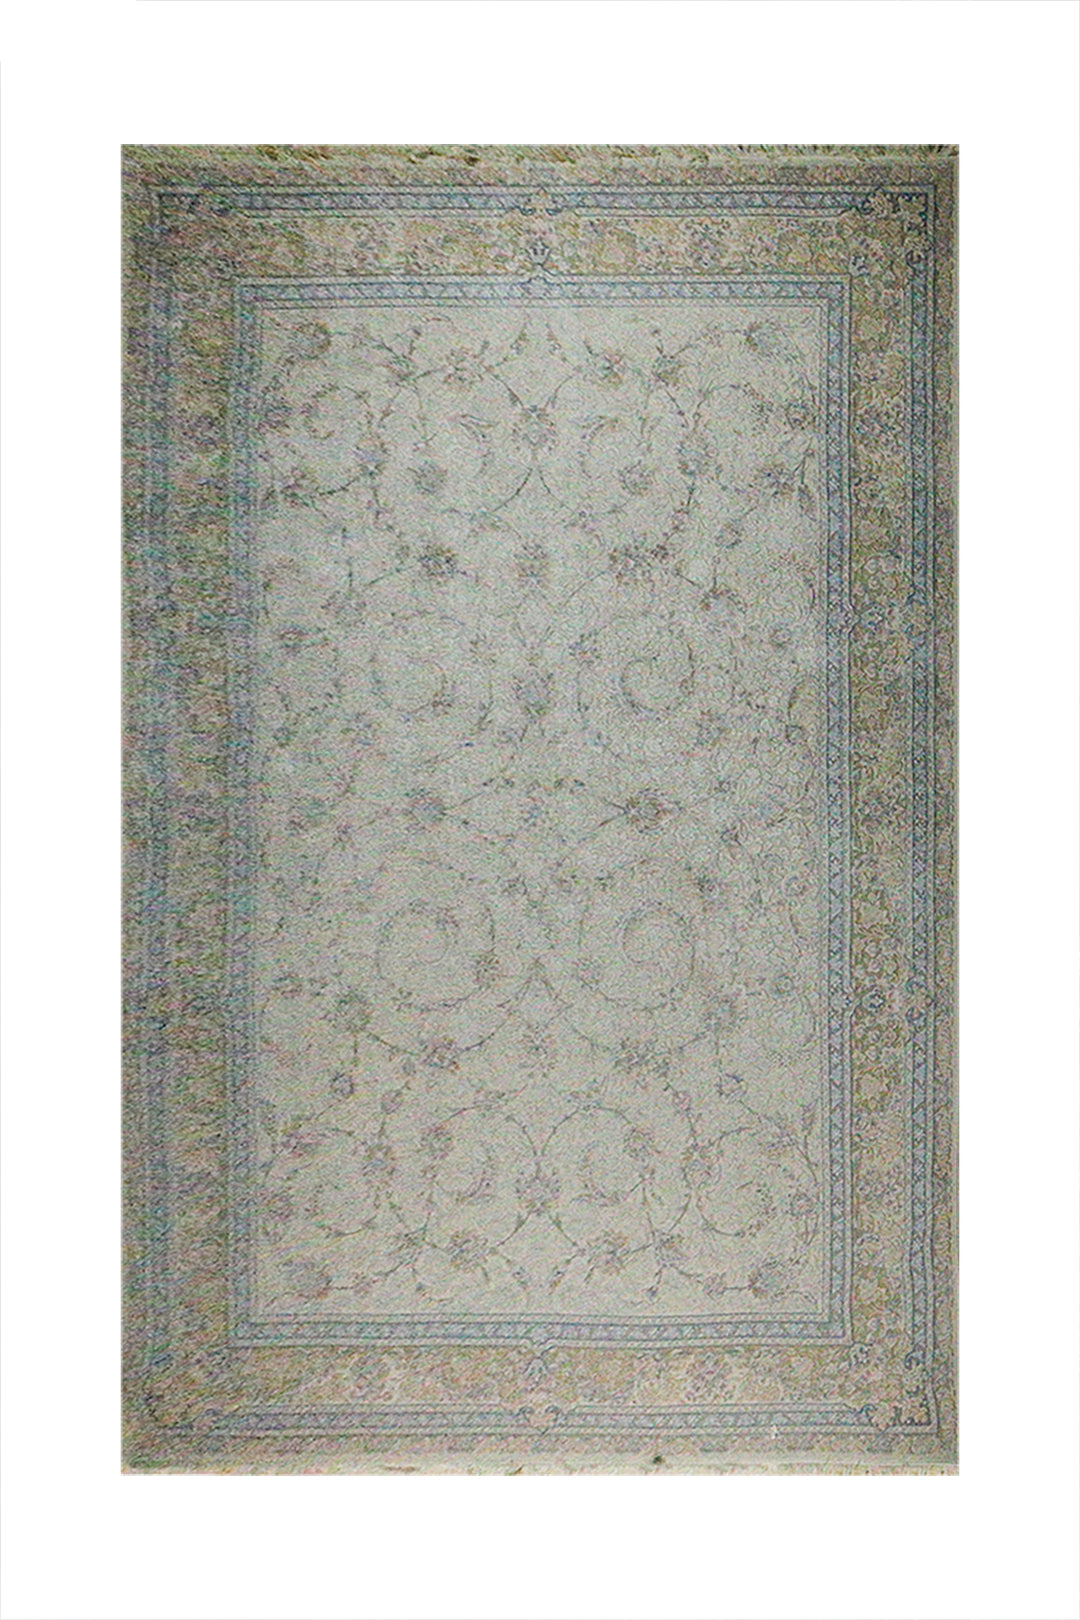 Turkish Modern Silk 1200 Rug - Beige - 8.2 X 11.4 Ft- Resilient Construction For Long-Lasting Use